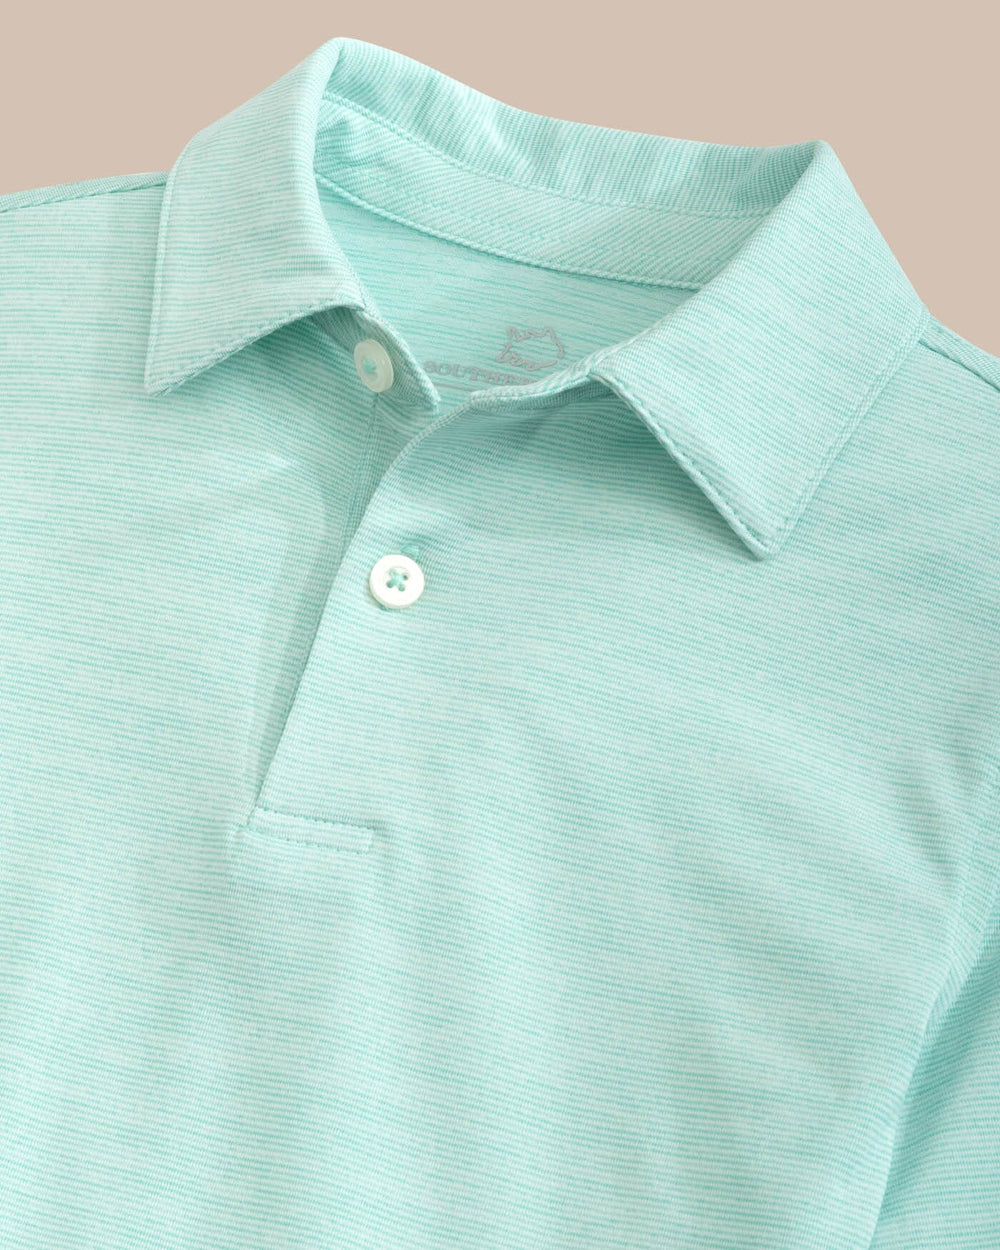 The detail view of the Southern Tide Team Colors Boy's Driver Spacedye Polo Shirt by Southern Tide - Marine Blue